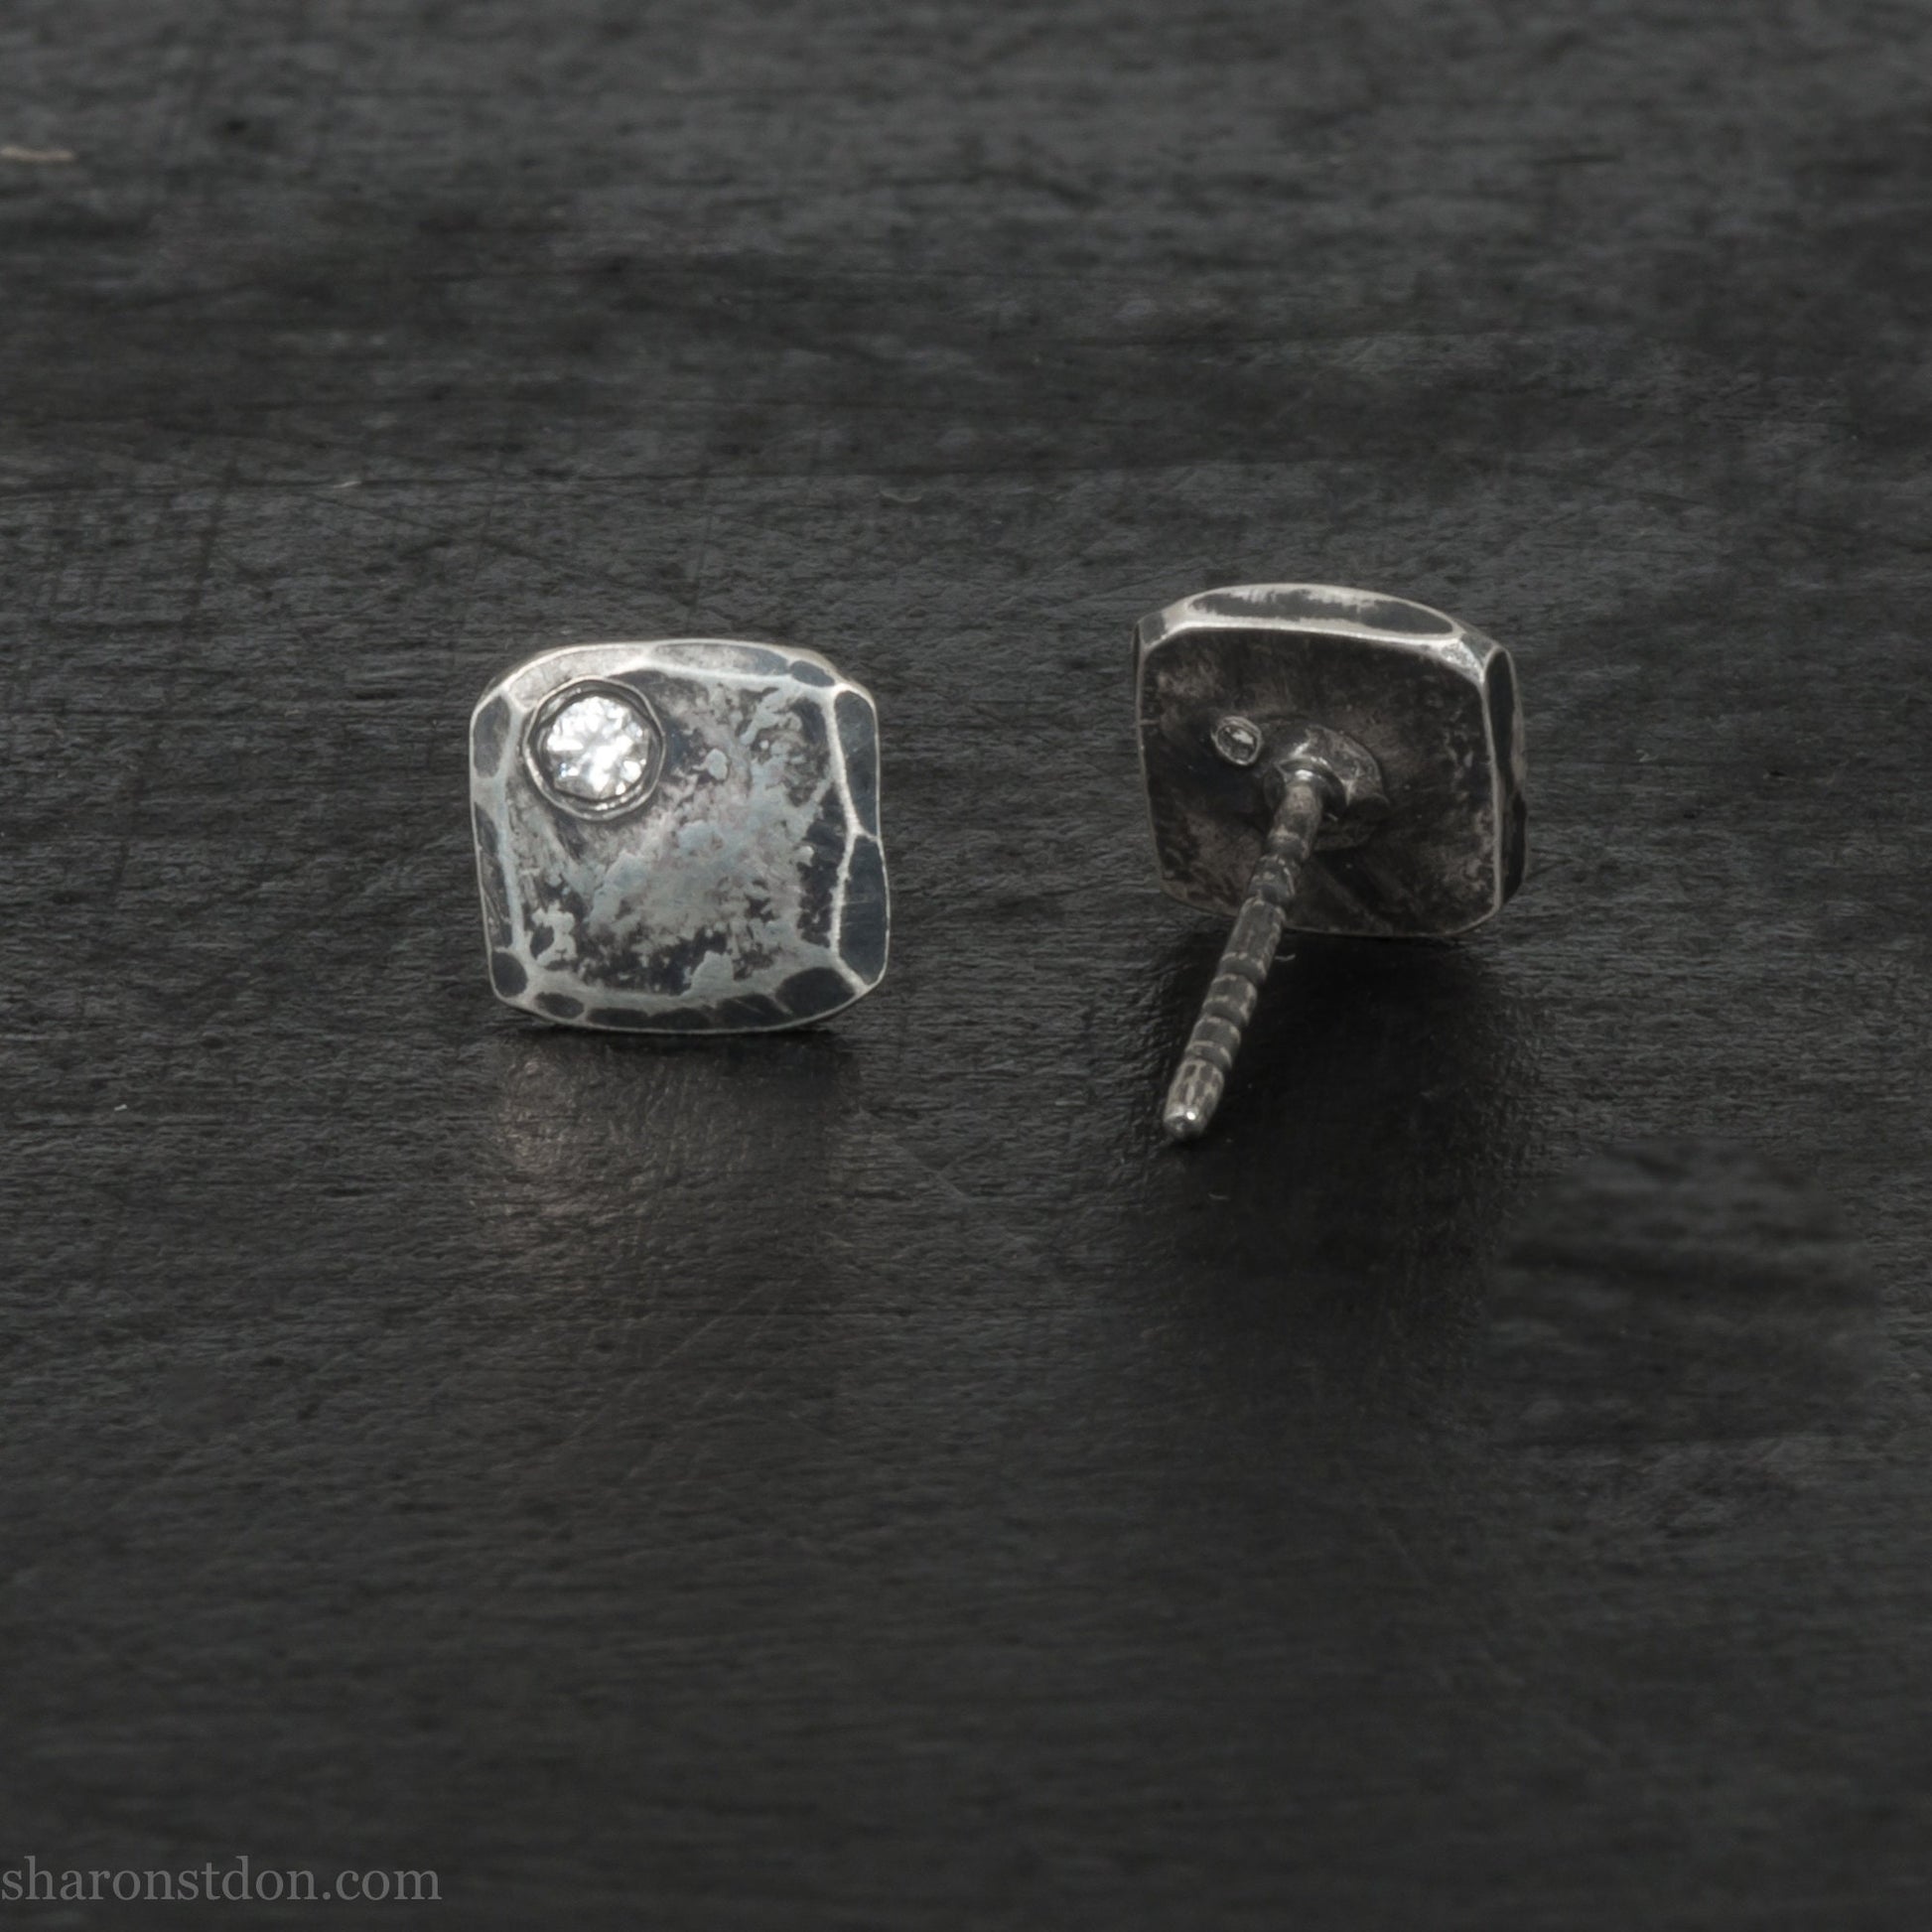 Handmade 925 sterling silver stud earrings with cubic zirconia gemstones. Small 7mm square stud post earrings made by Sharon SaintDon in North America.